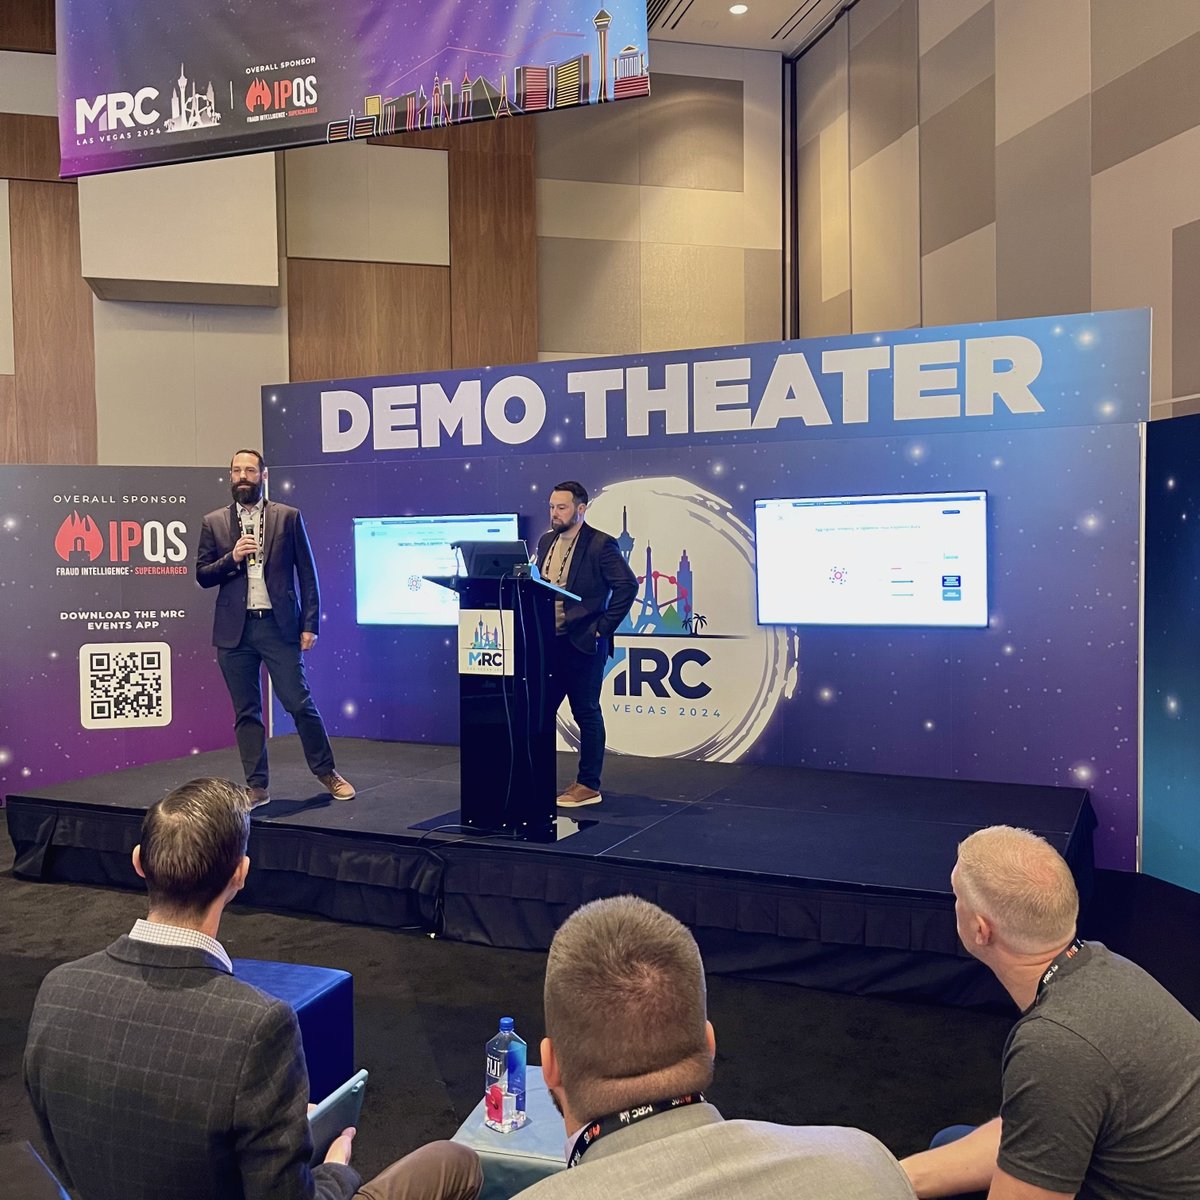 Our team had an inspiring, fun week at MRC Vegas 2024! We're grateful to those who connected with us and for the opportunity to educate attendees on payments, and how our services make us the global go-to for optimizing payments ecosystems! #optimizedpayments #mrcvegas2024